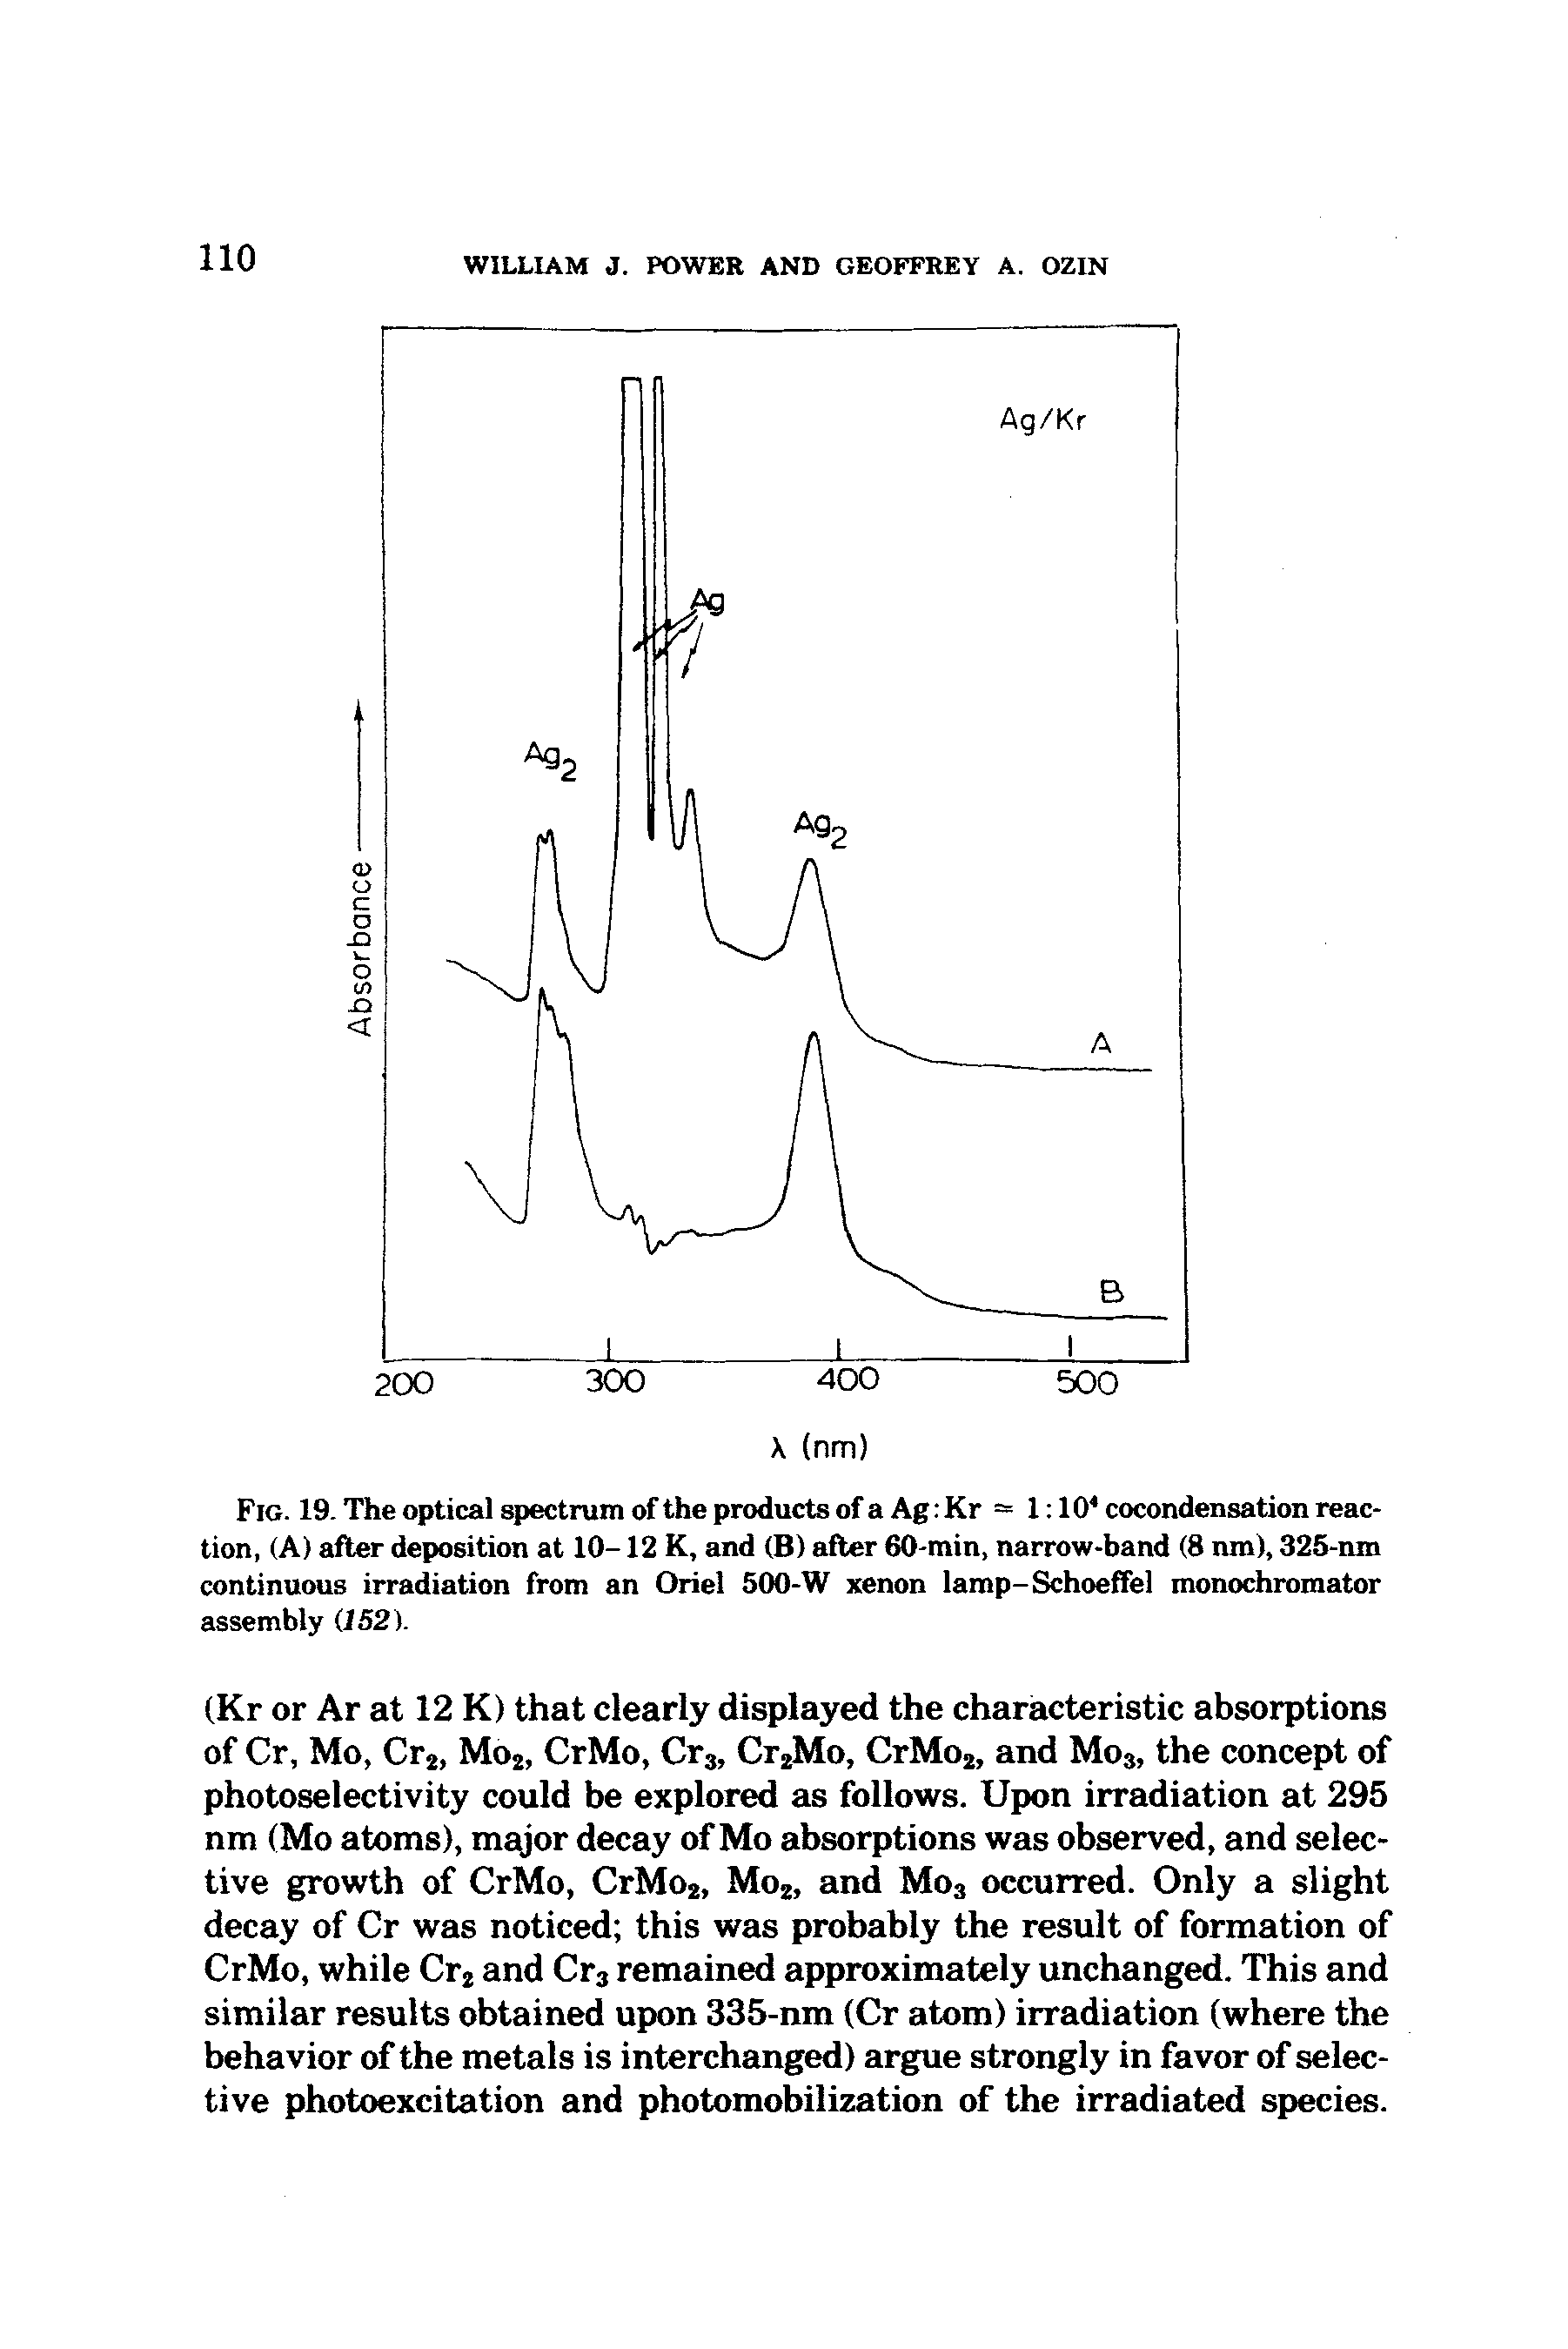 Fig. 19. The optical spectrum of the products of a Ag Kr — 1 10 cocondensation reaction, (A) after deposition at 10-12 K, and (B) after 60-min, narrow-band (8 nm), 325-nin continuous irradiation from an Oriel 500-W xenon lamp-Schoeffel monochromator assembly (152).